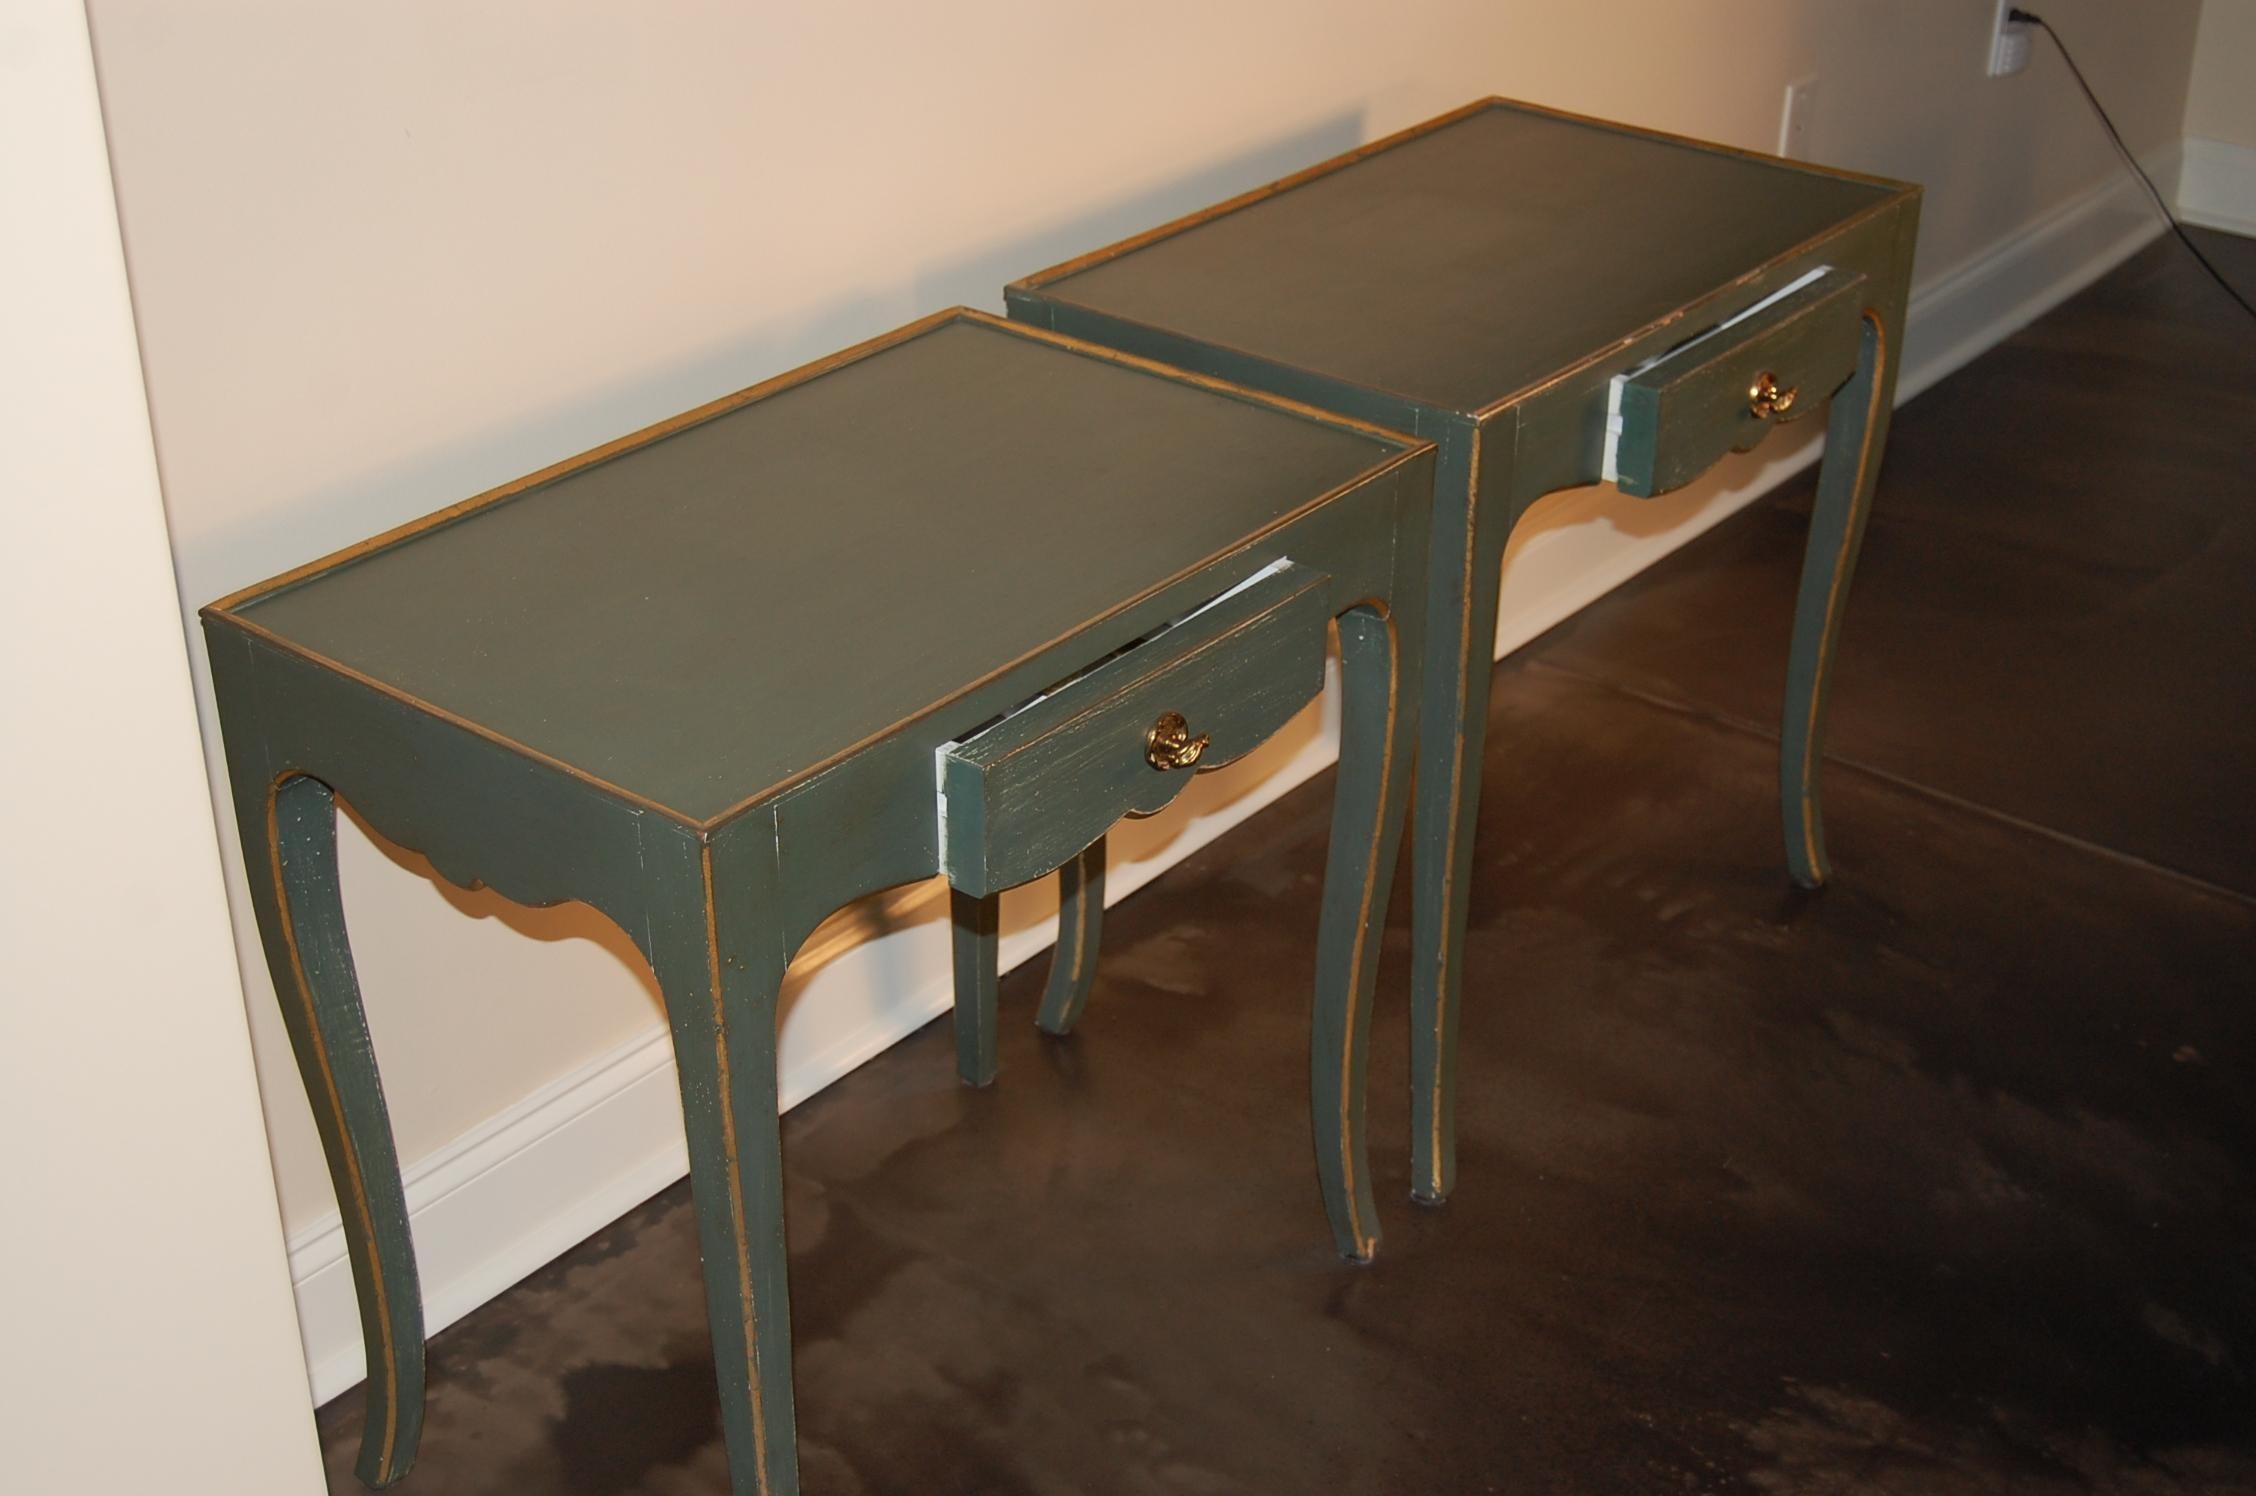 Pair of Custom Made Side Tables in Green Paint with Drawers 1